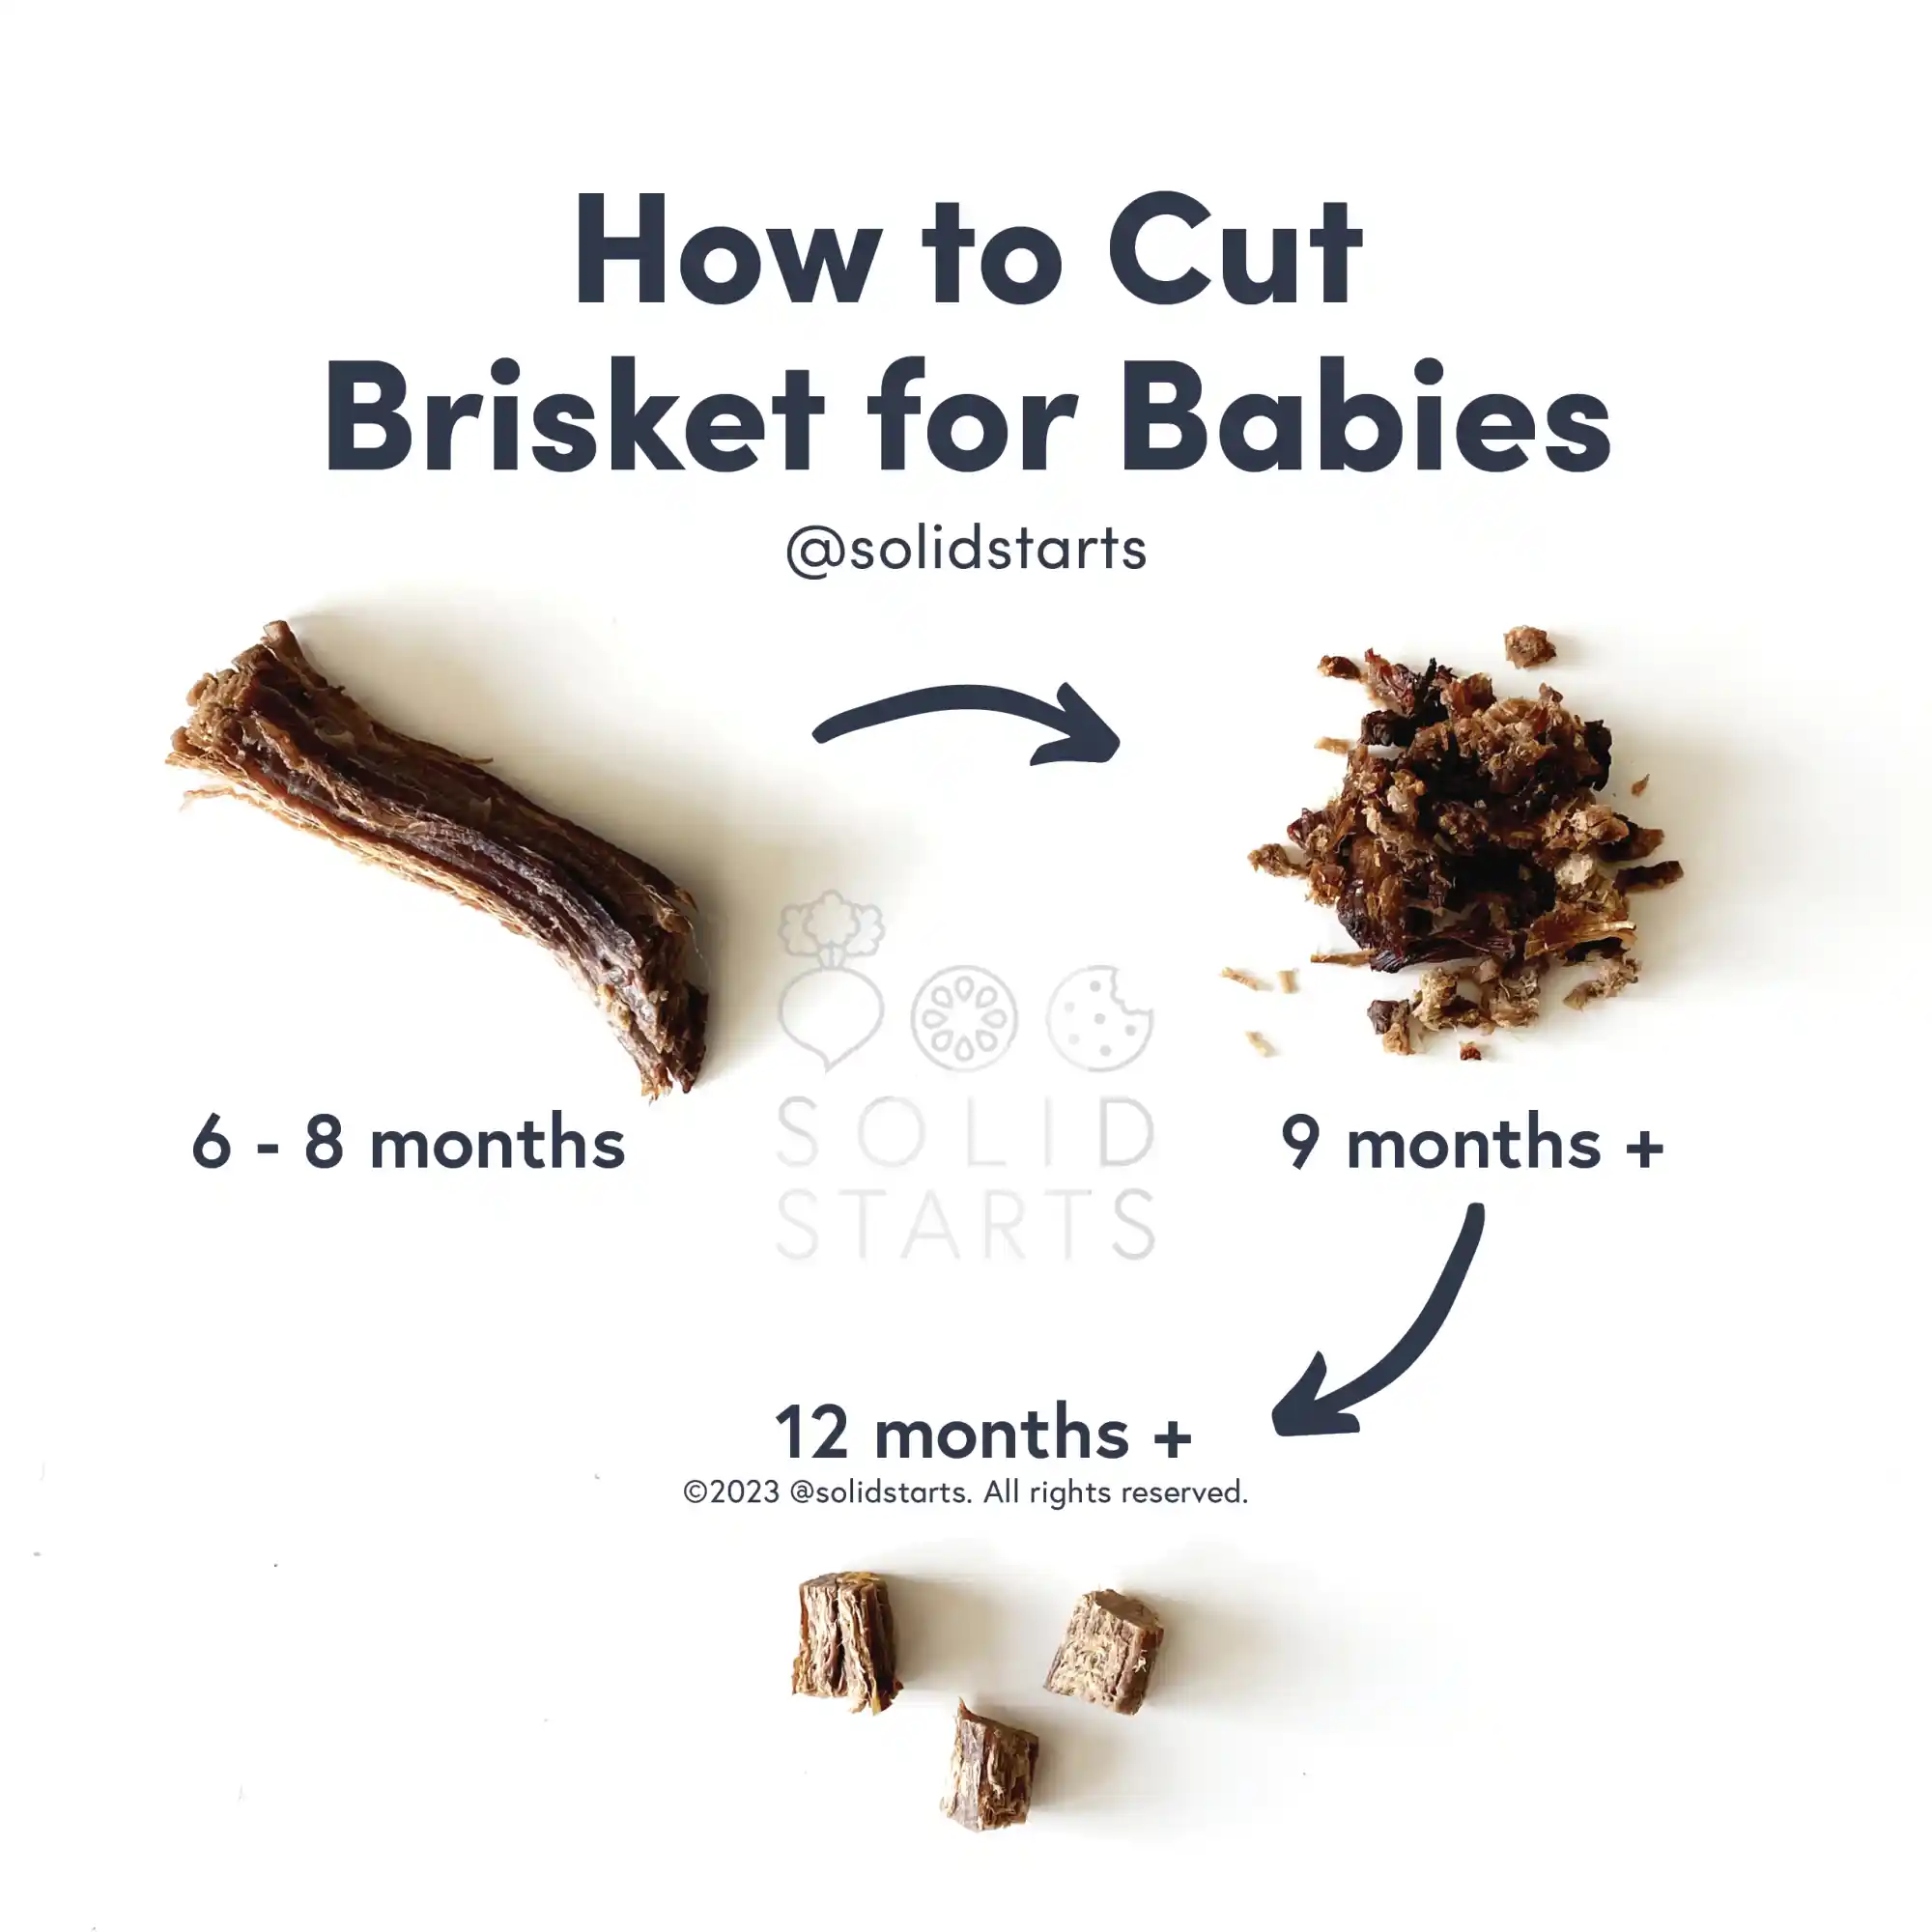 a Solid Starts infographic with the header "How to Cut Brisket for Babies": strips for 6-8 mos, shreds for 9 mos+, and bite-sized pieces for 12 months+